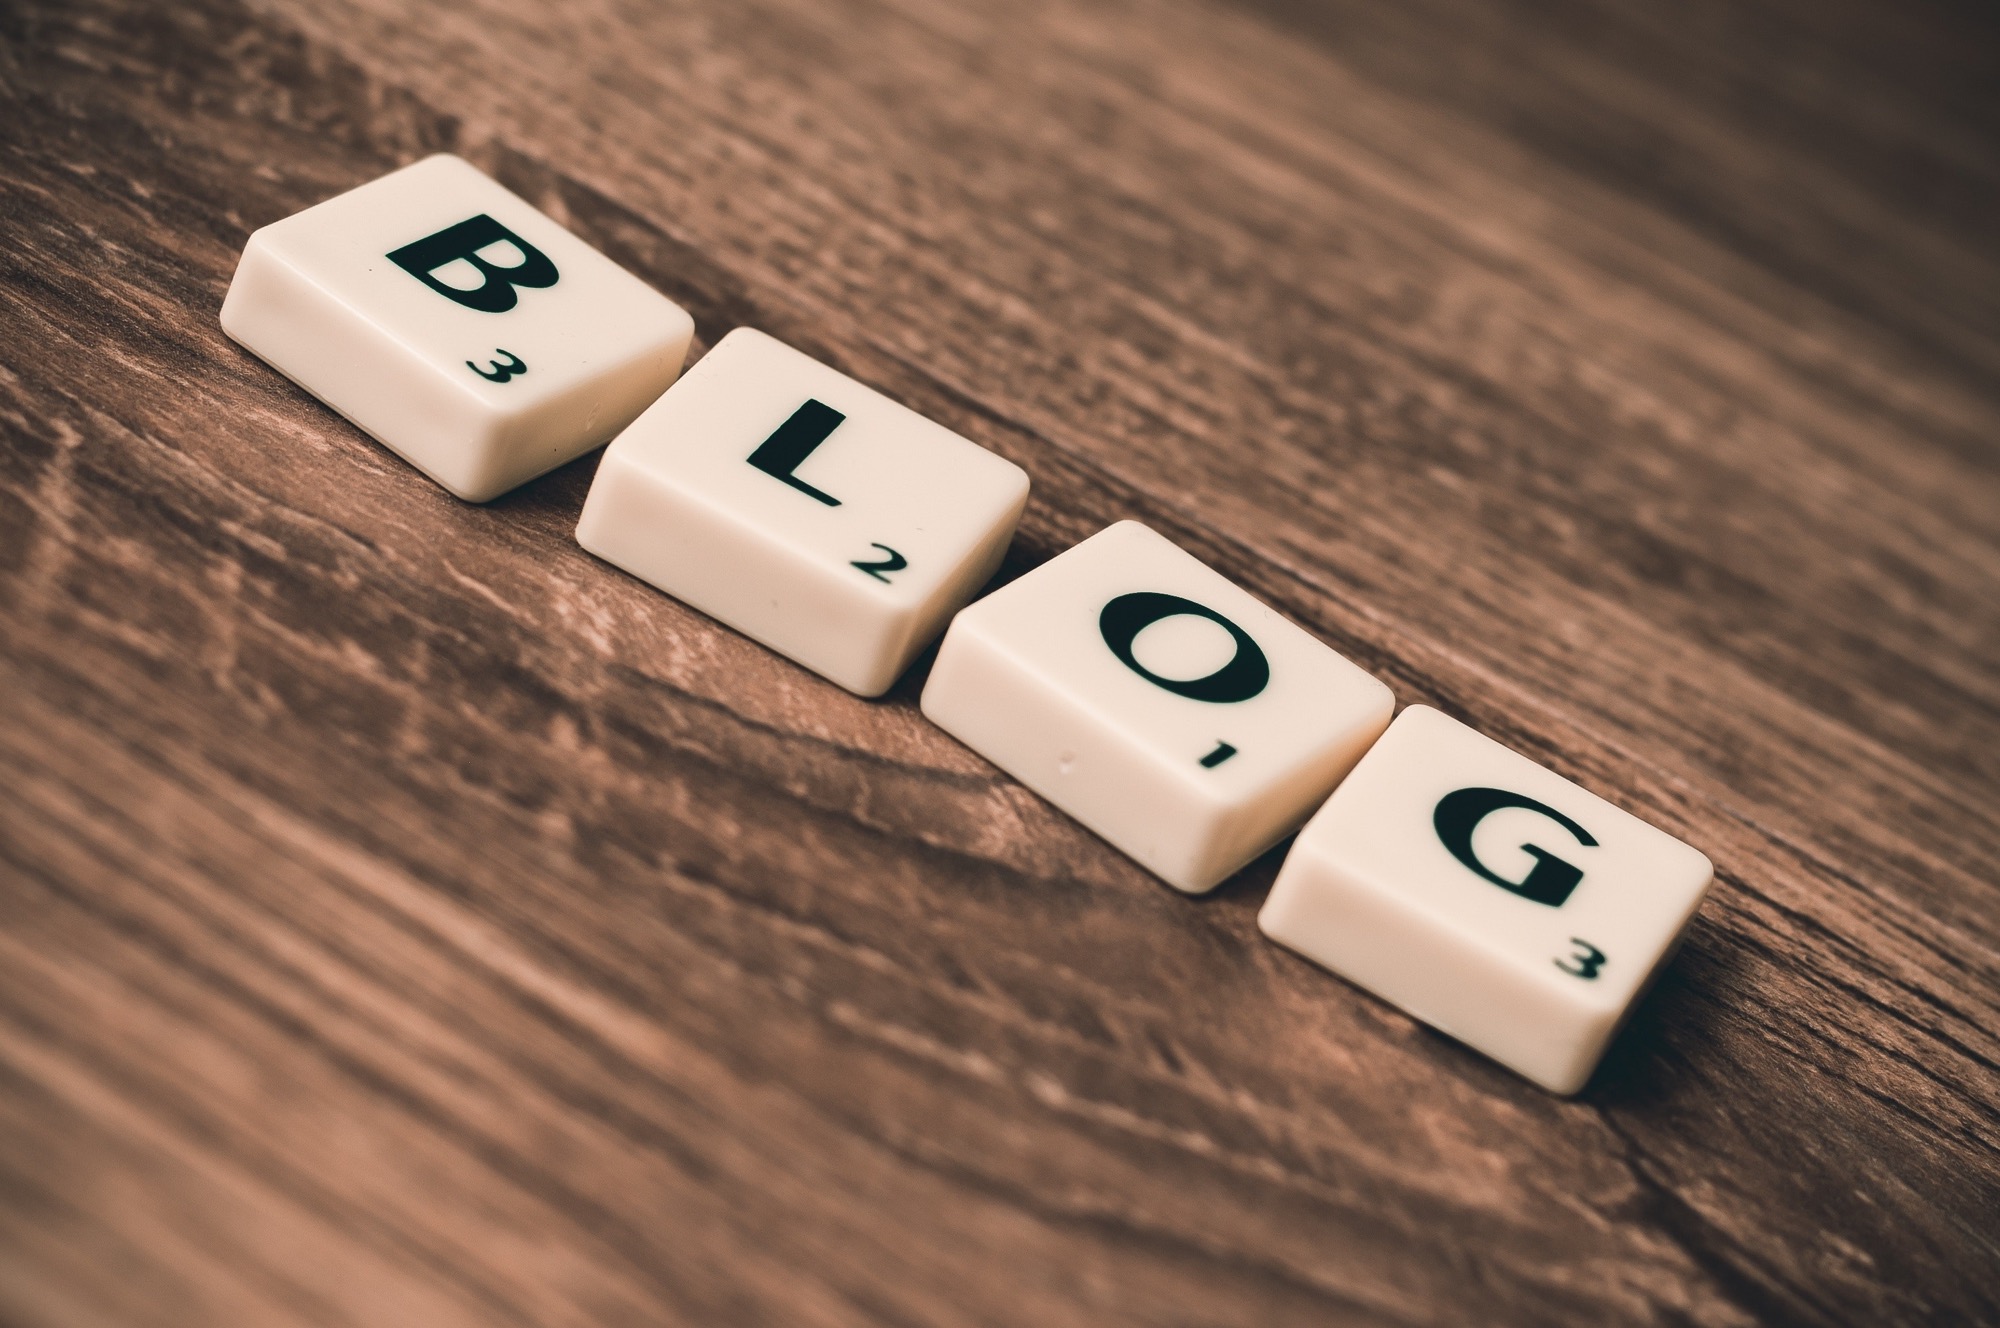 What do we get from blogging?